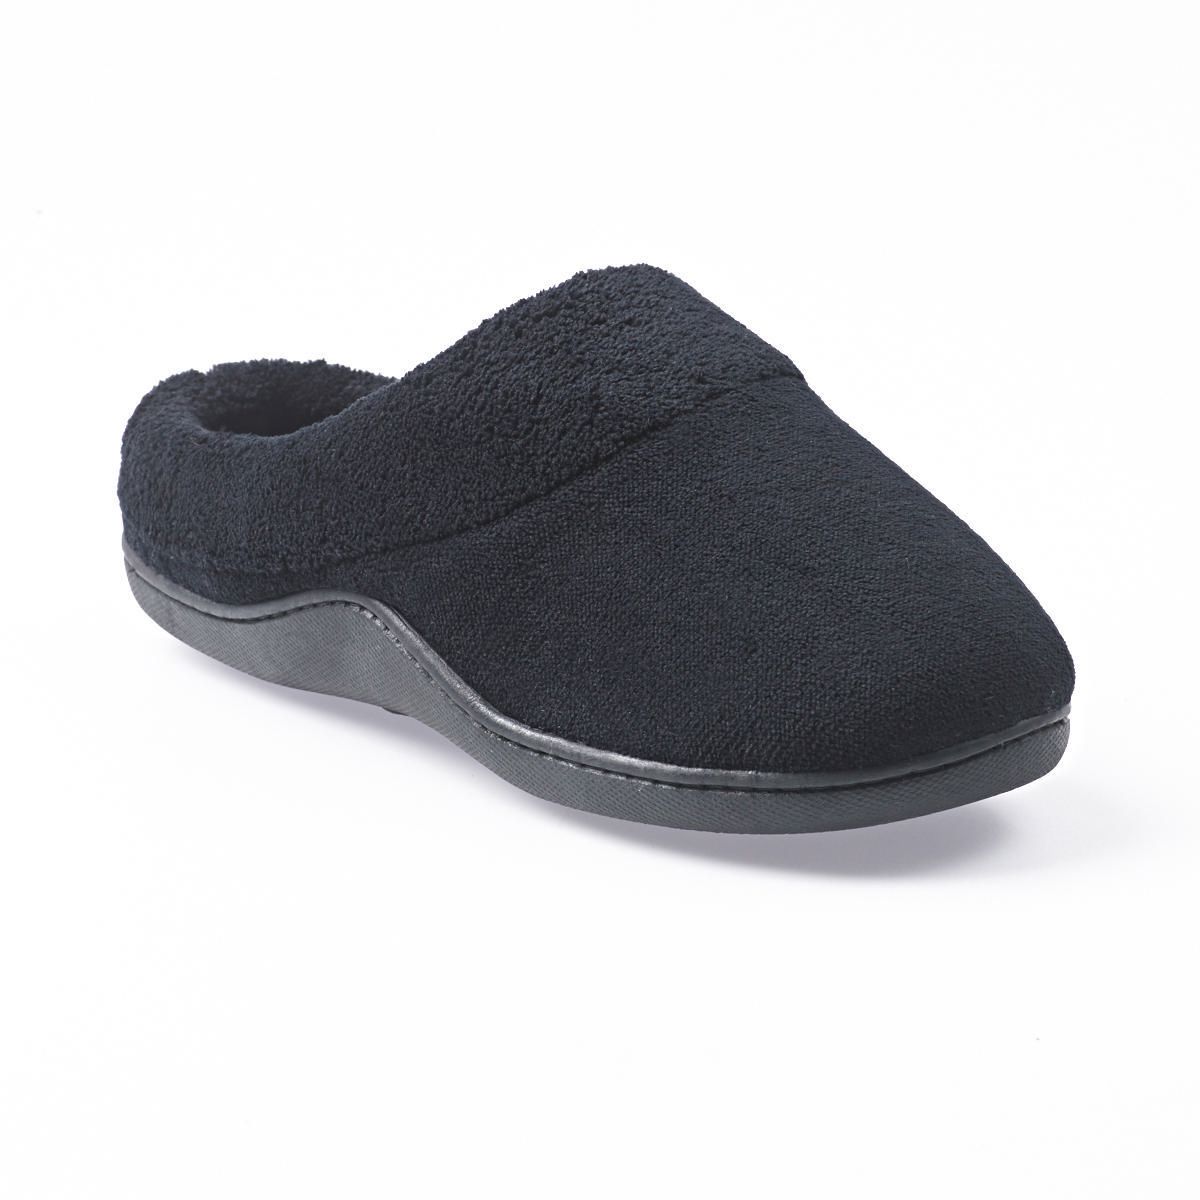 ISOspa by isotoner Women's Microterry Clog Slippers | Walmart Canada